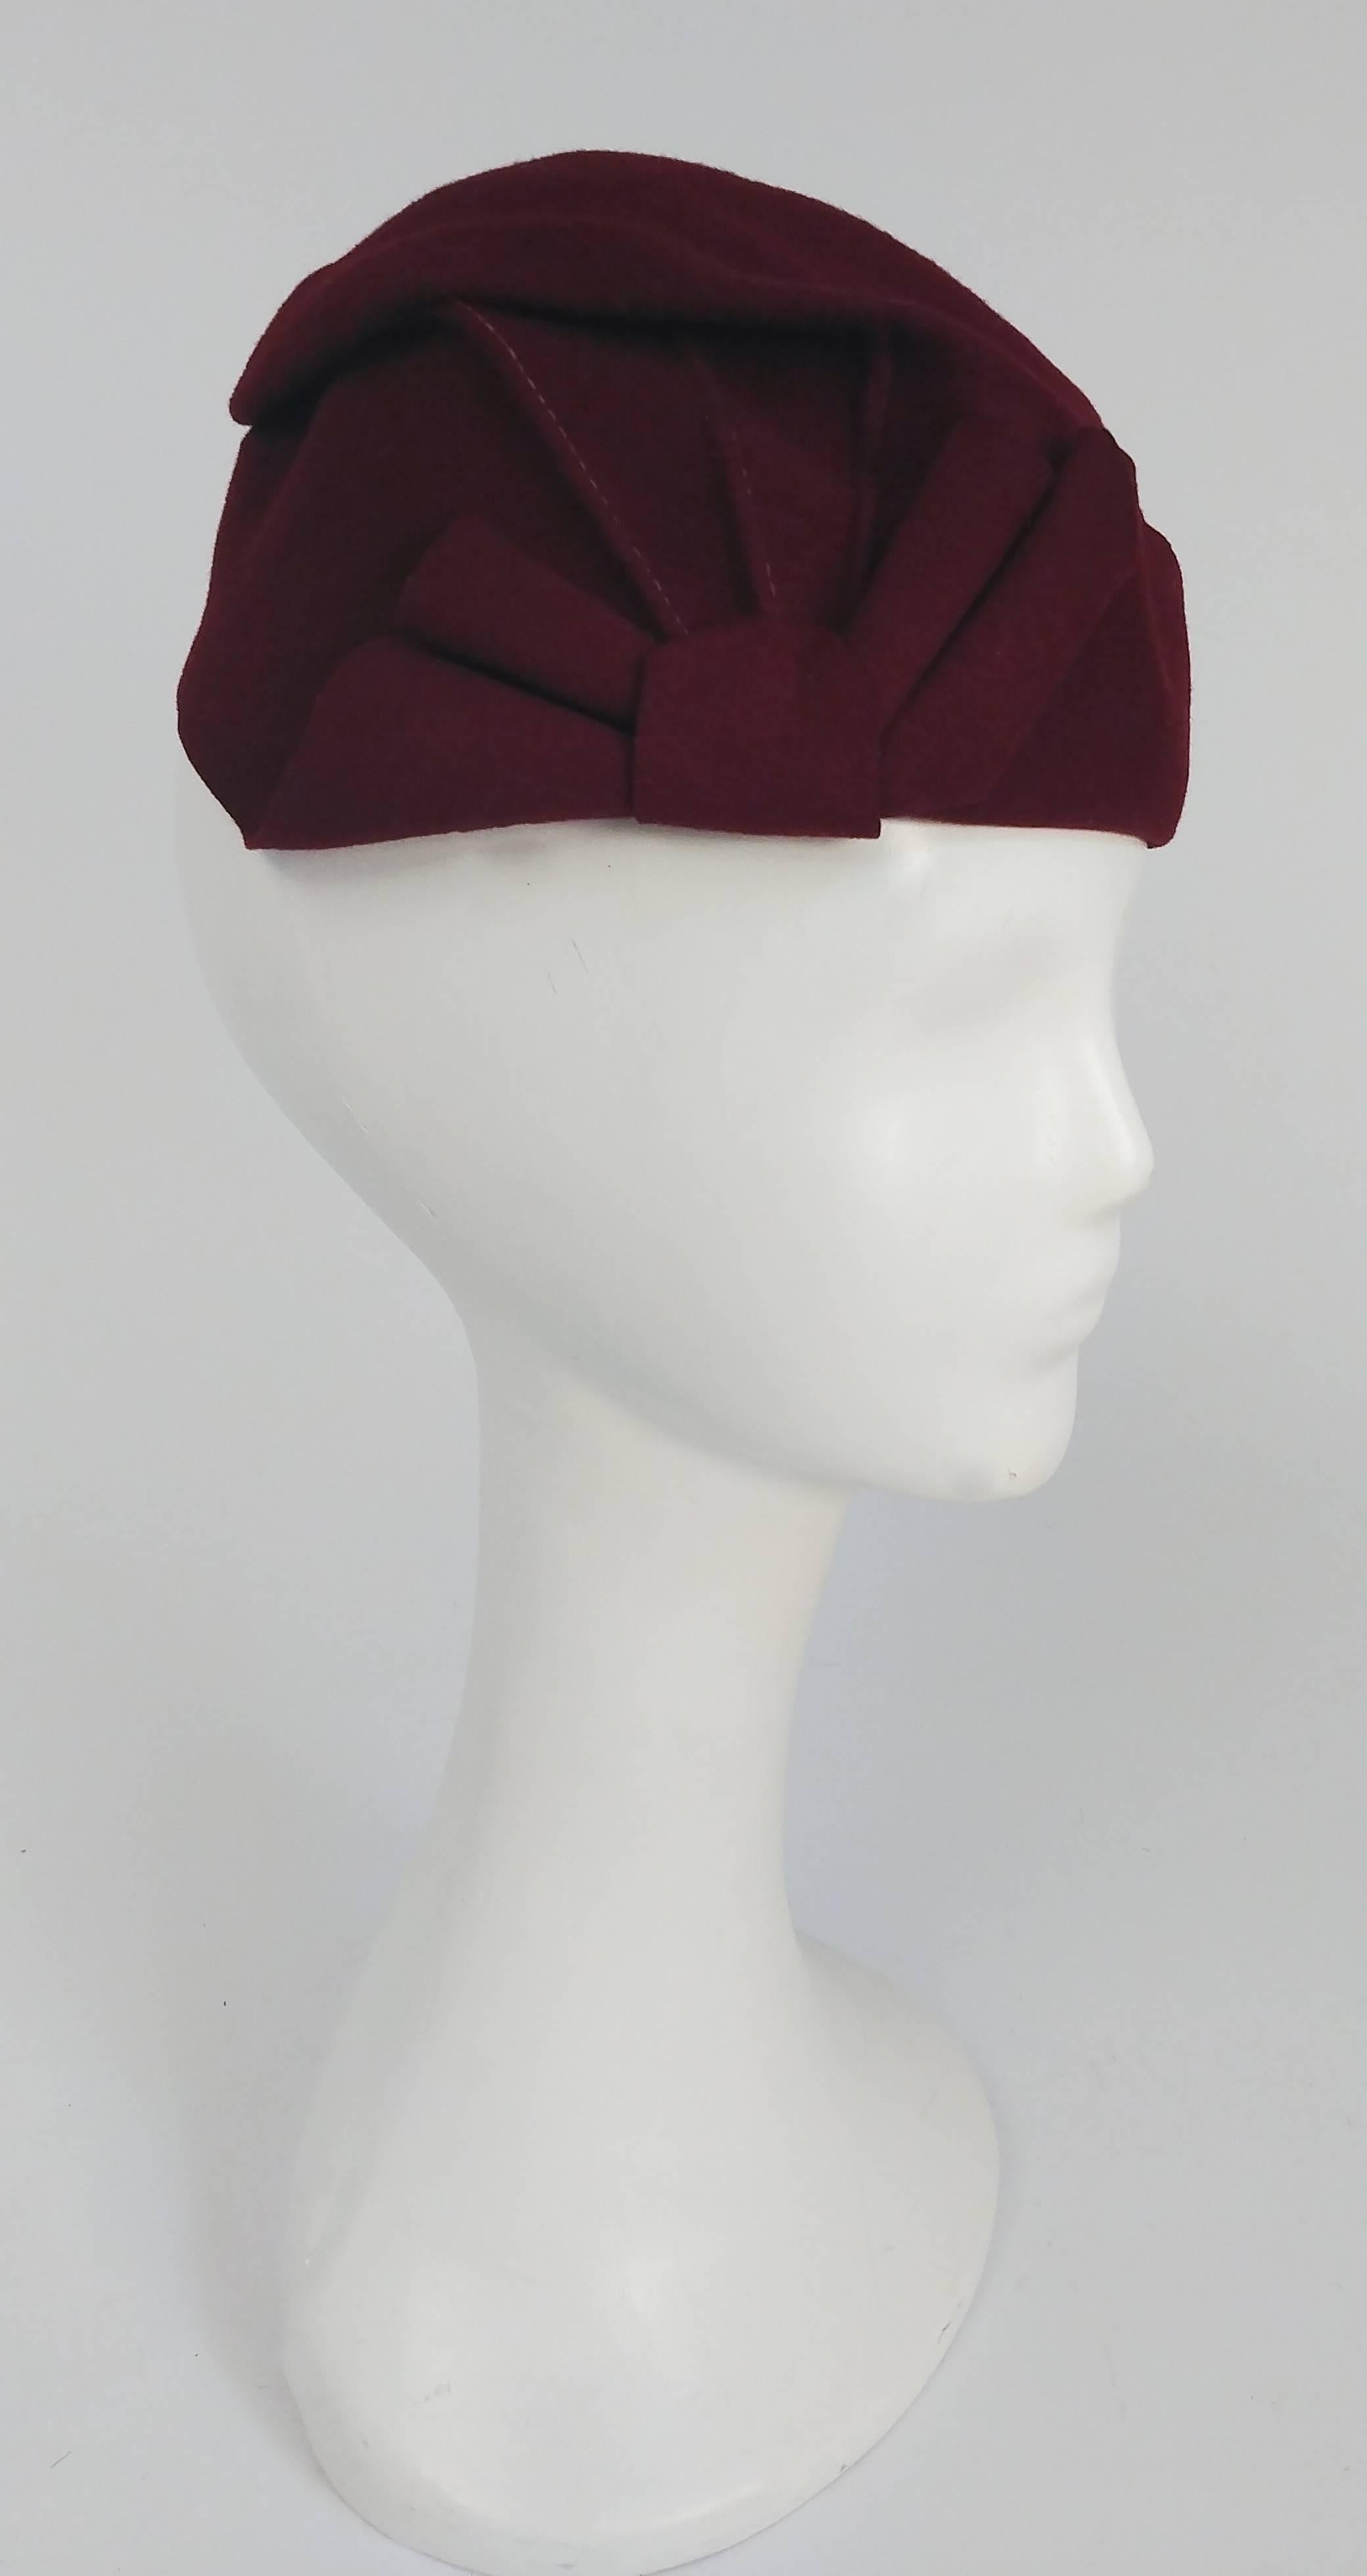 1930s Bordeaux Wool Hat. Fanned out side detail makes for great visual interest. Fits small.